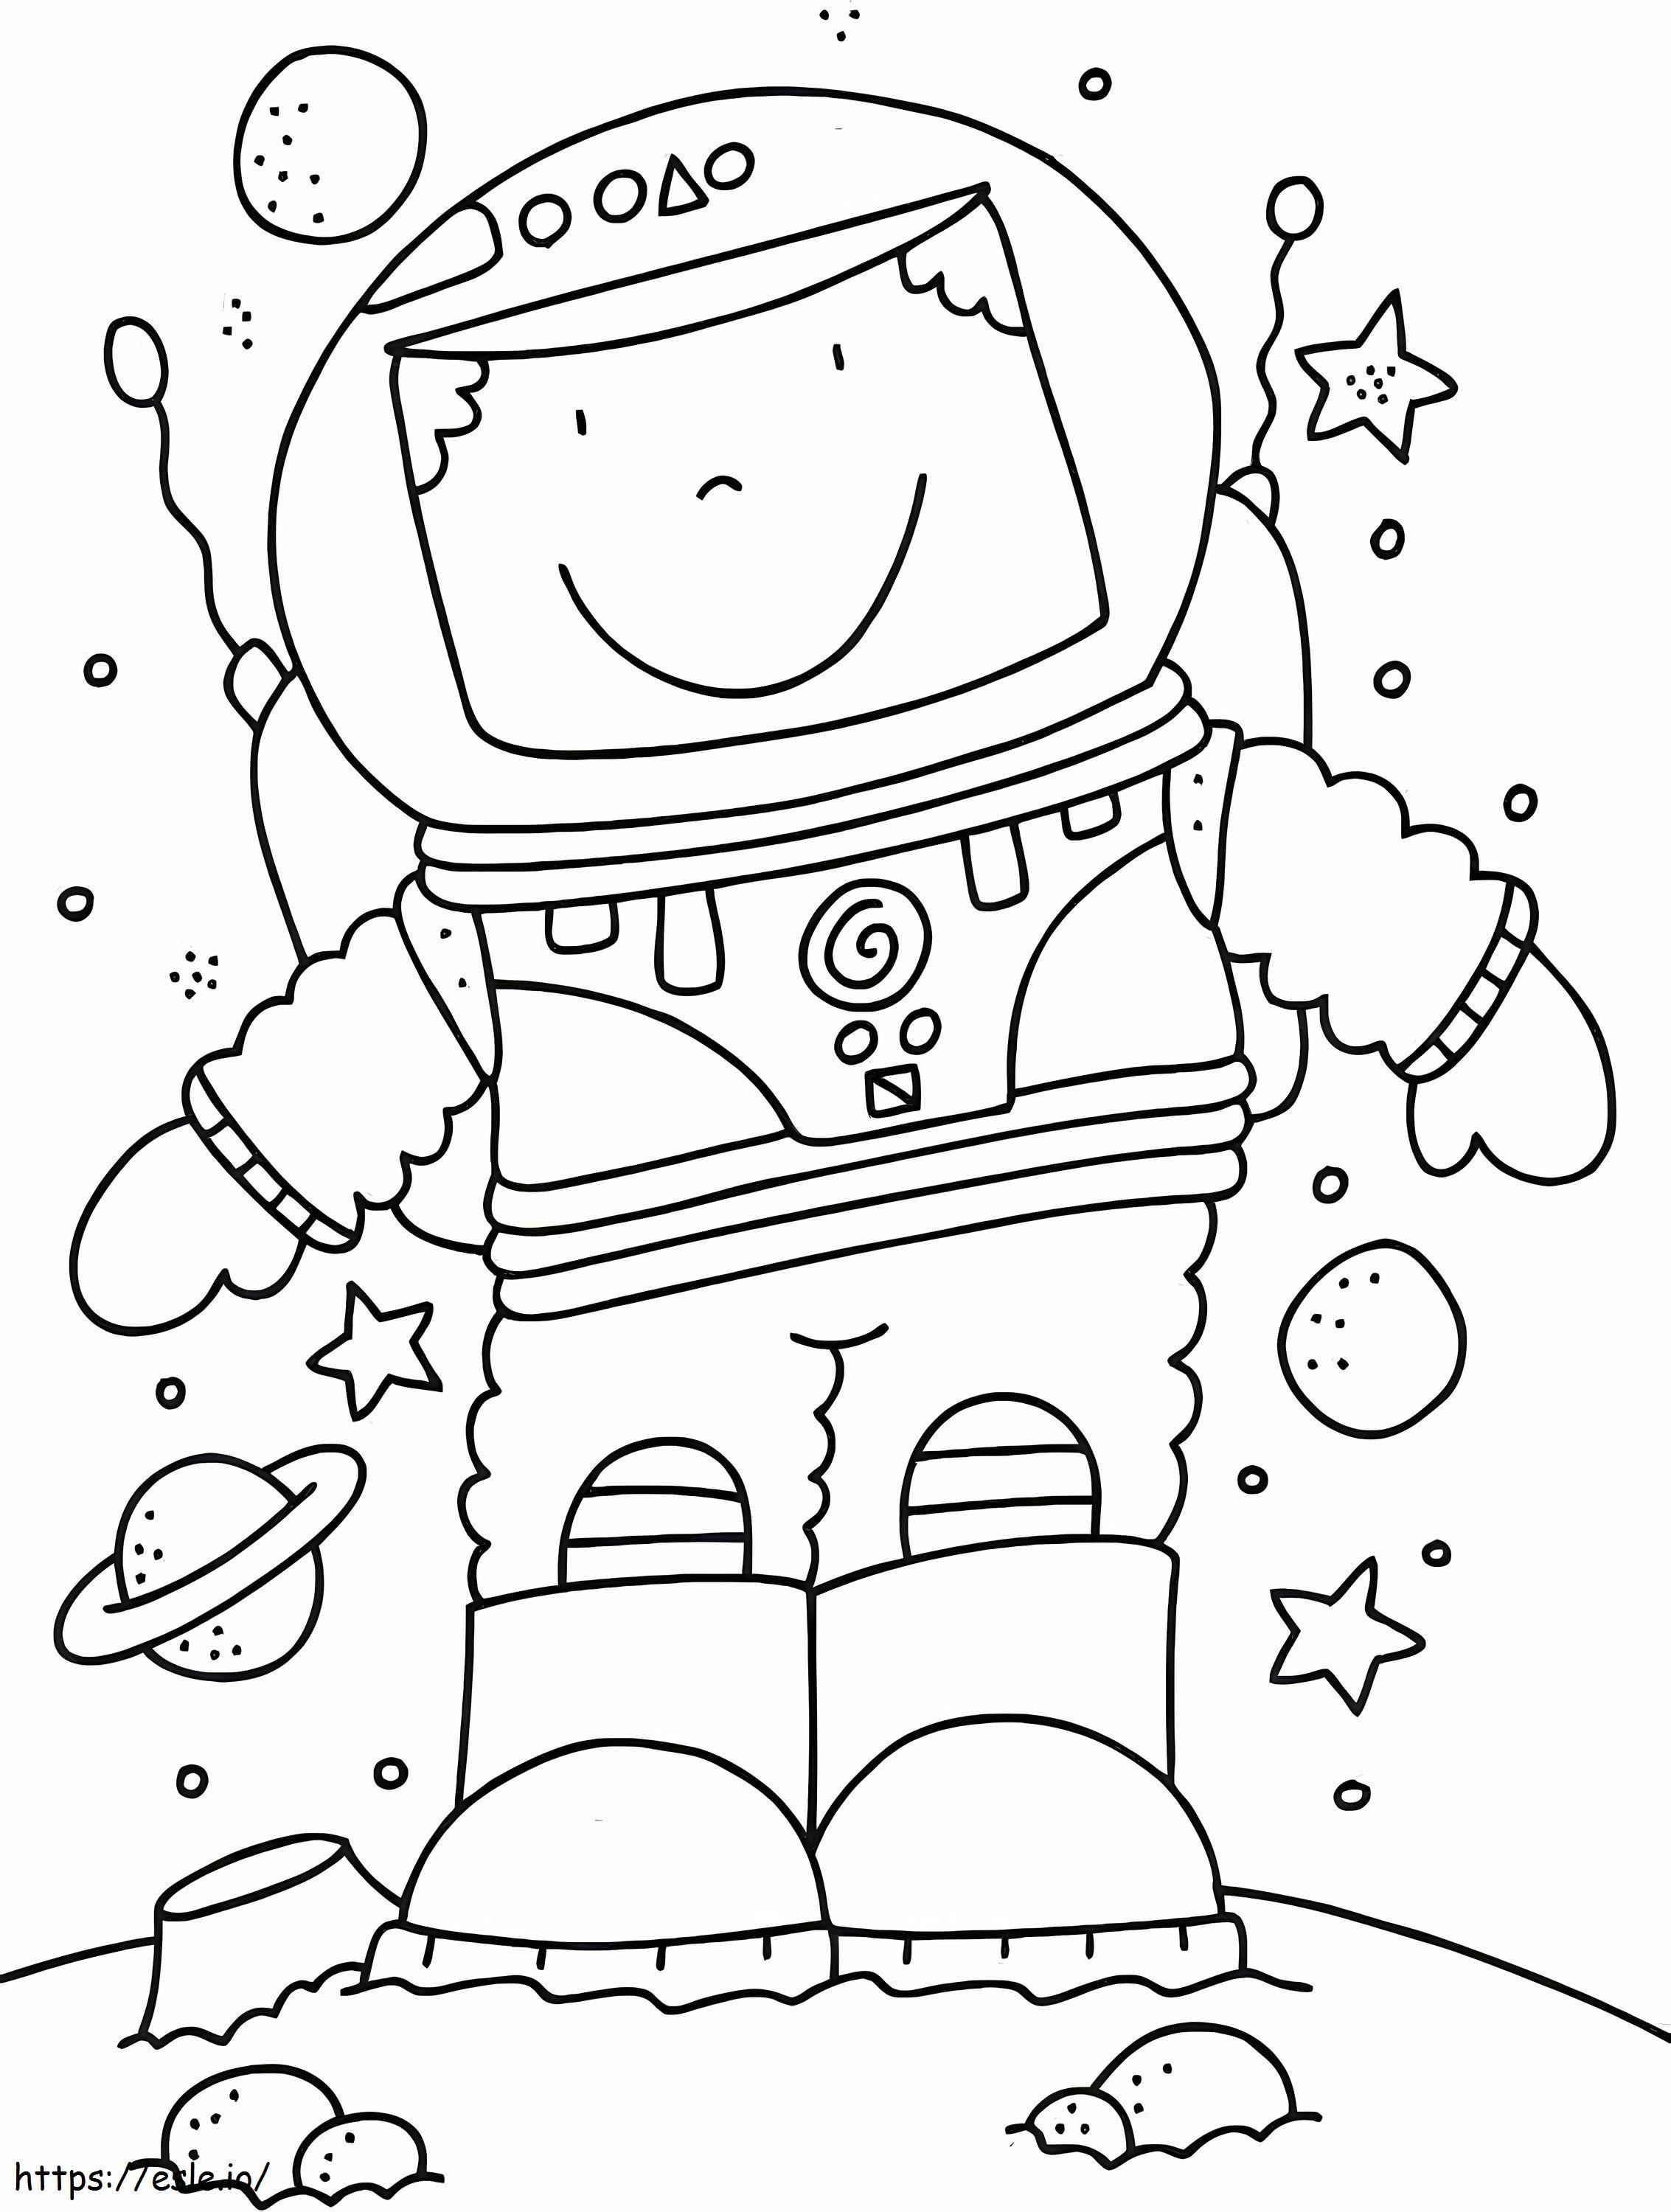 Simple Astronaut coloring page